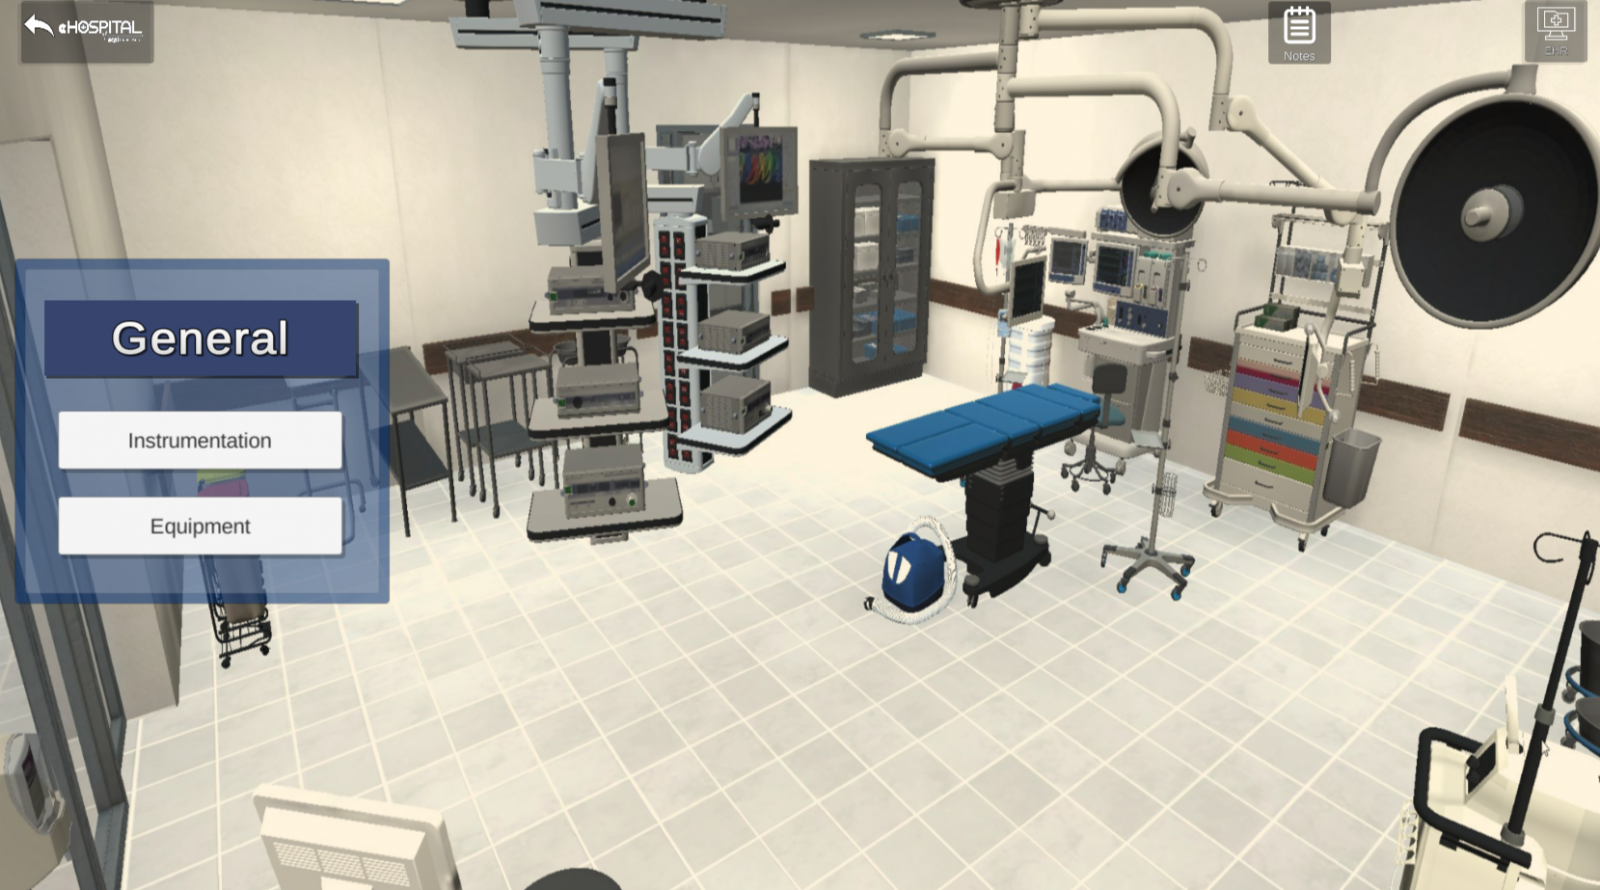 ECPI University's eHospital program takes health care students inside virtual medical environments, allowing them to practice hands-on skills while learning remotely during the pandemic. (Image/Provided)